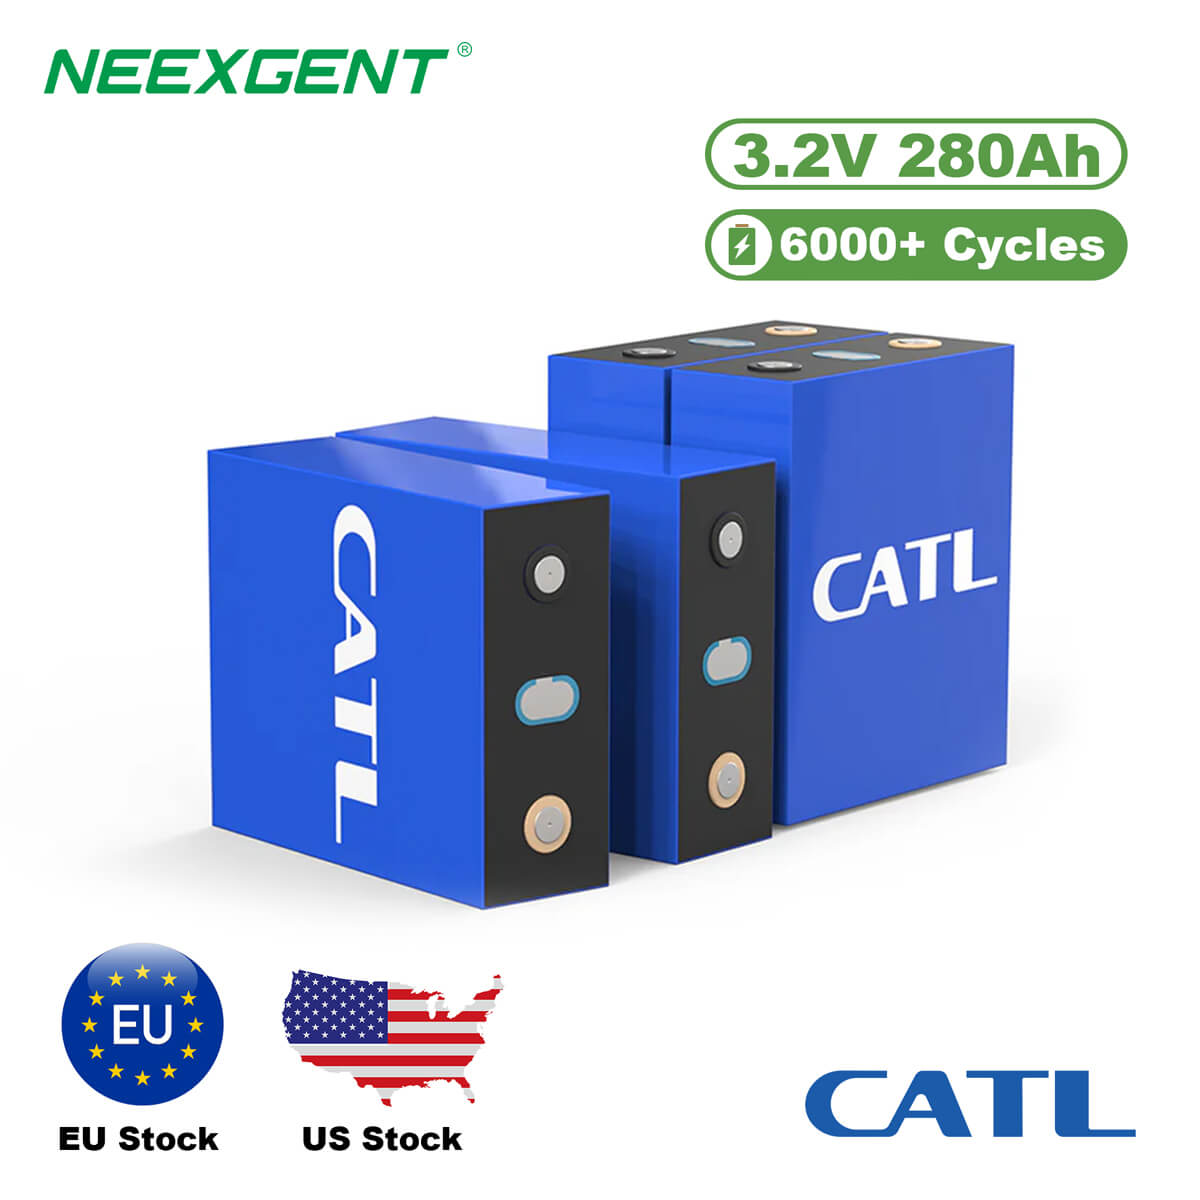 Neexgent CATL 3.2v 280ah Grade A Prismatic Lifepo4 Battery Cell for DIY Battery Pack